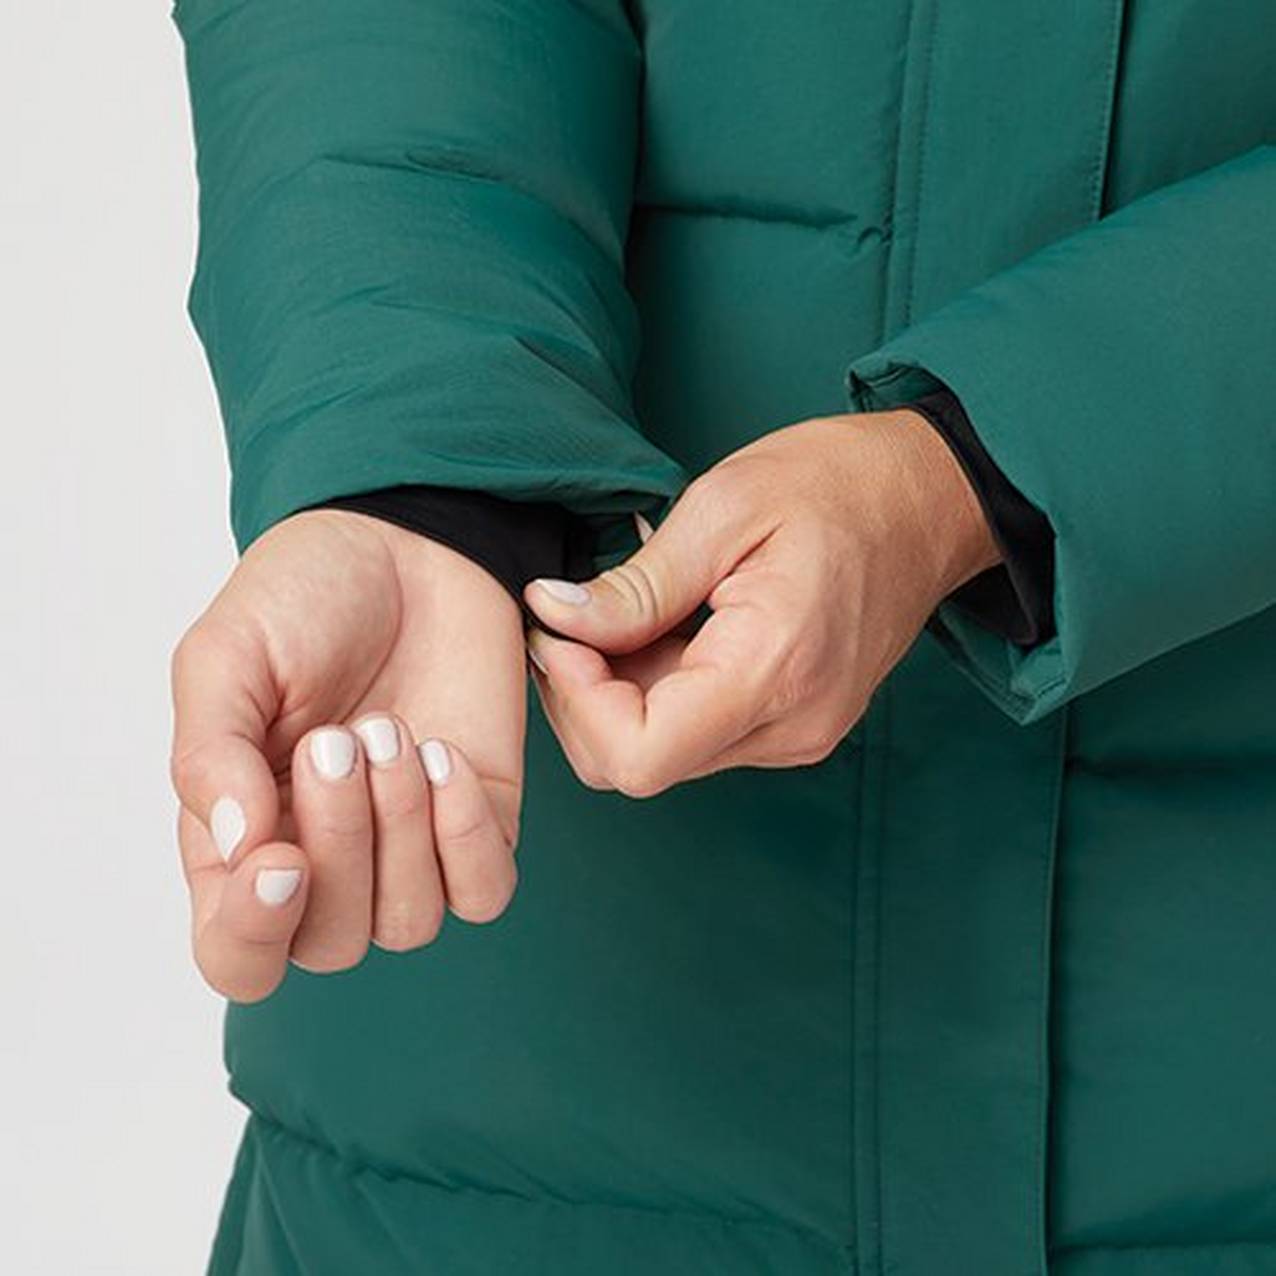 Close up of hands pulling the interior storm cuff down from inside the cuff of the jacket sleeve